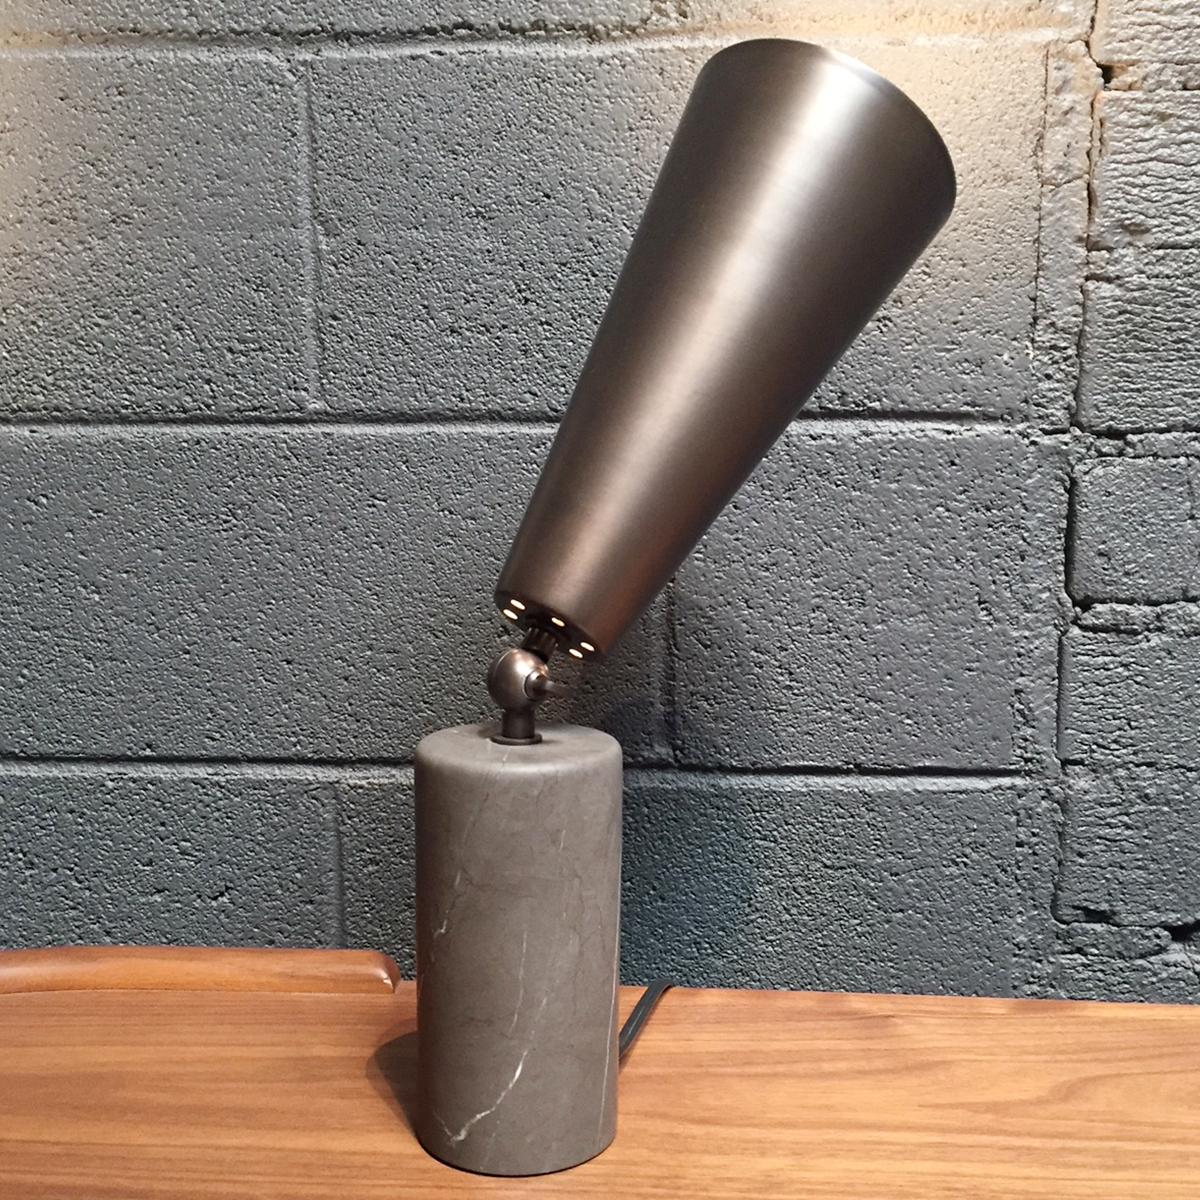 US 110v table lamp with Persian grey stone base, dark bronze metal parts and adjustable diffuser, available from showroom display. 
Measure: 5